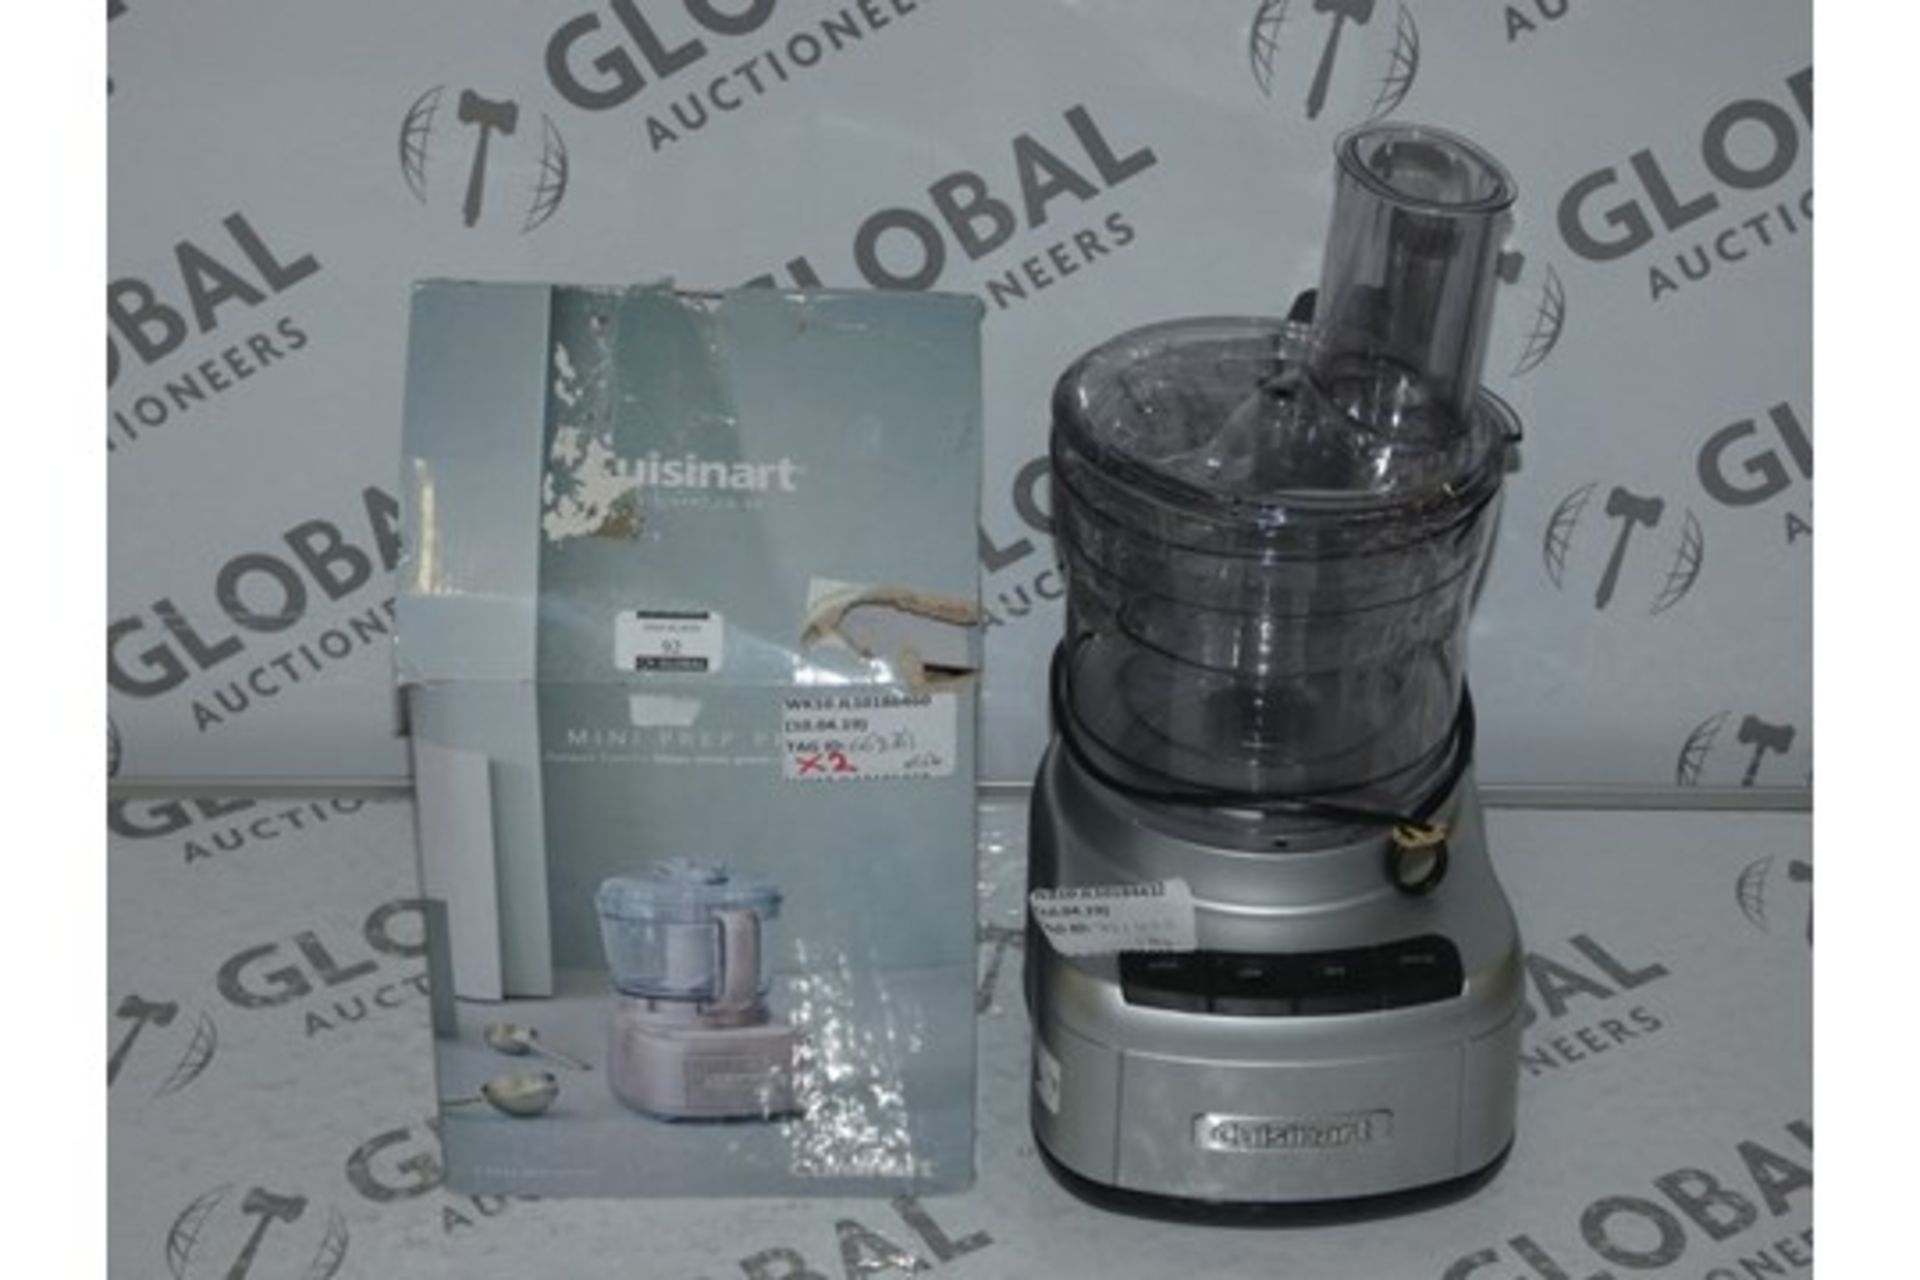 Lot to Contain 2 Assorted Boxed and Unboxed Cuisiniart Multi Foor Processors Combined RRP £120 (